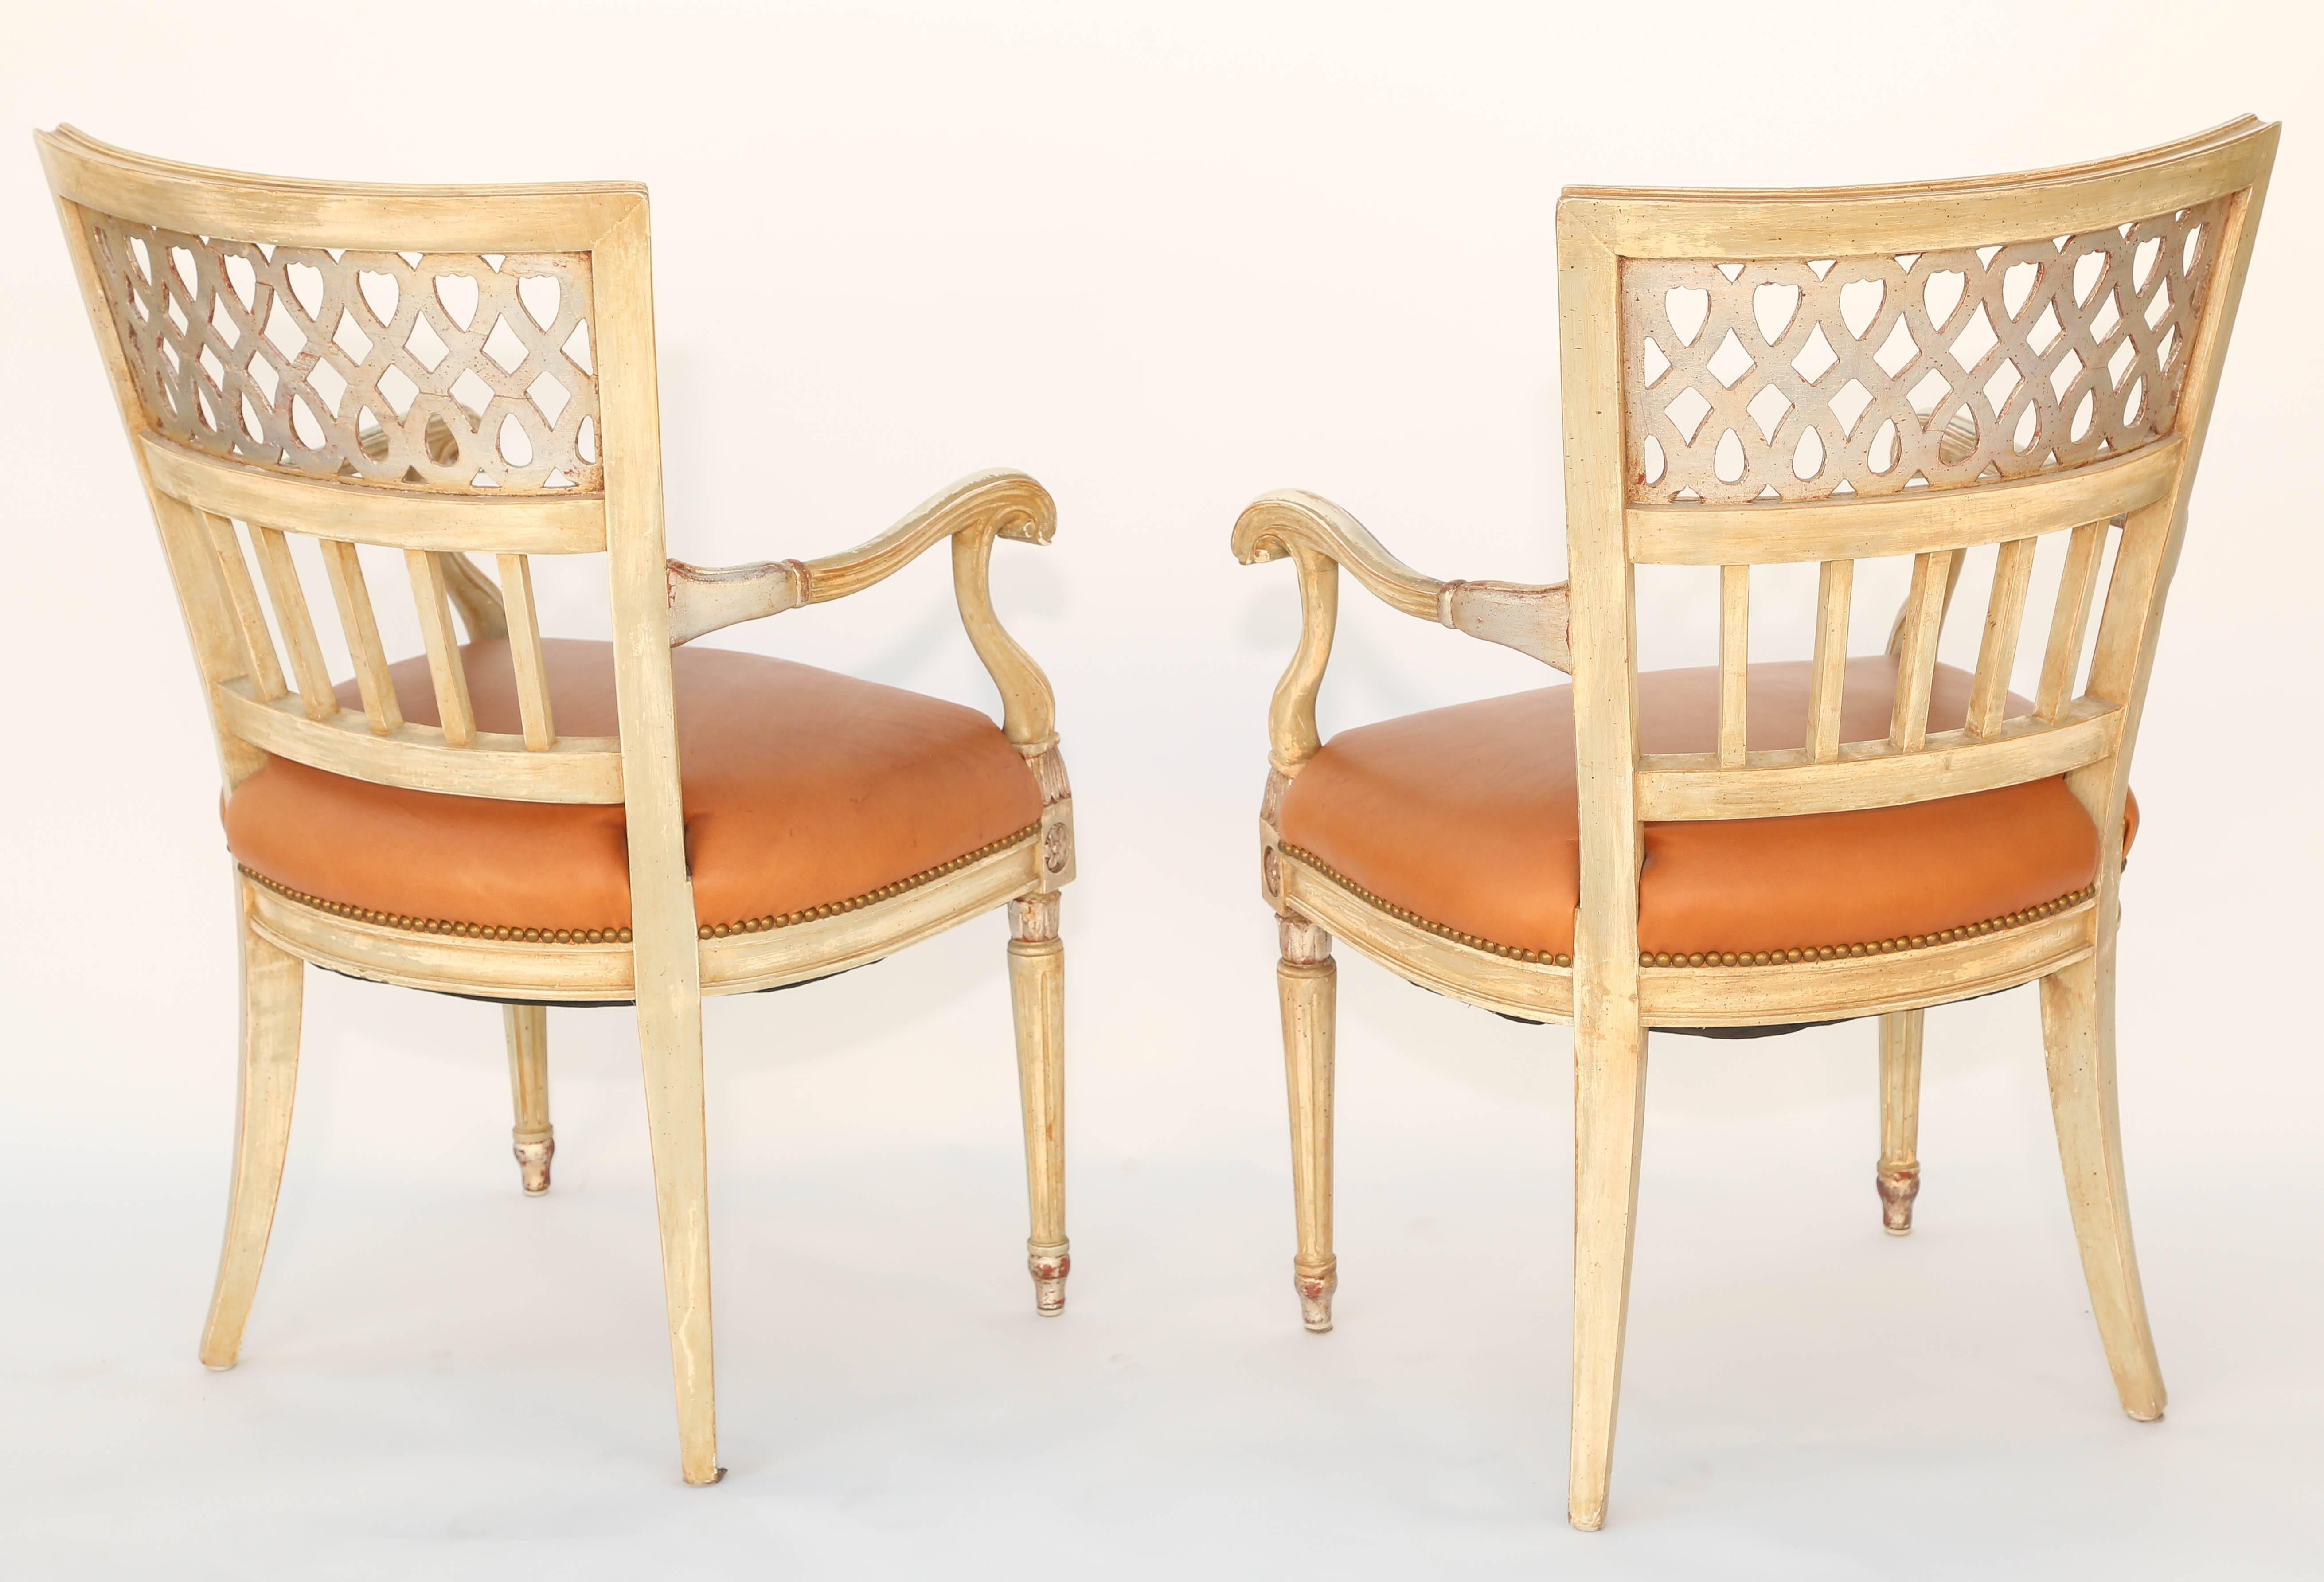 Pair of Painted and Parcel Silvergilt Italian Armchairs, circa 1920s In Excellent Condition For Sale In West Palm Beach, FL